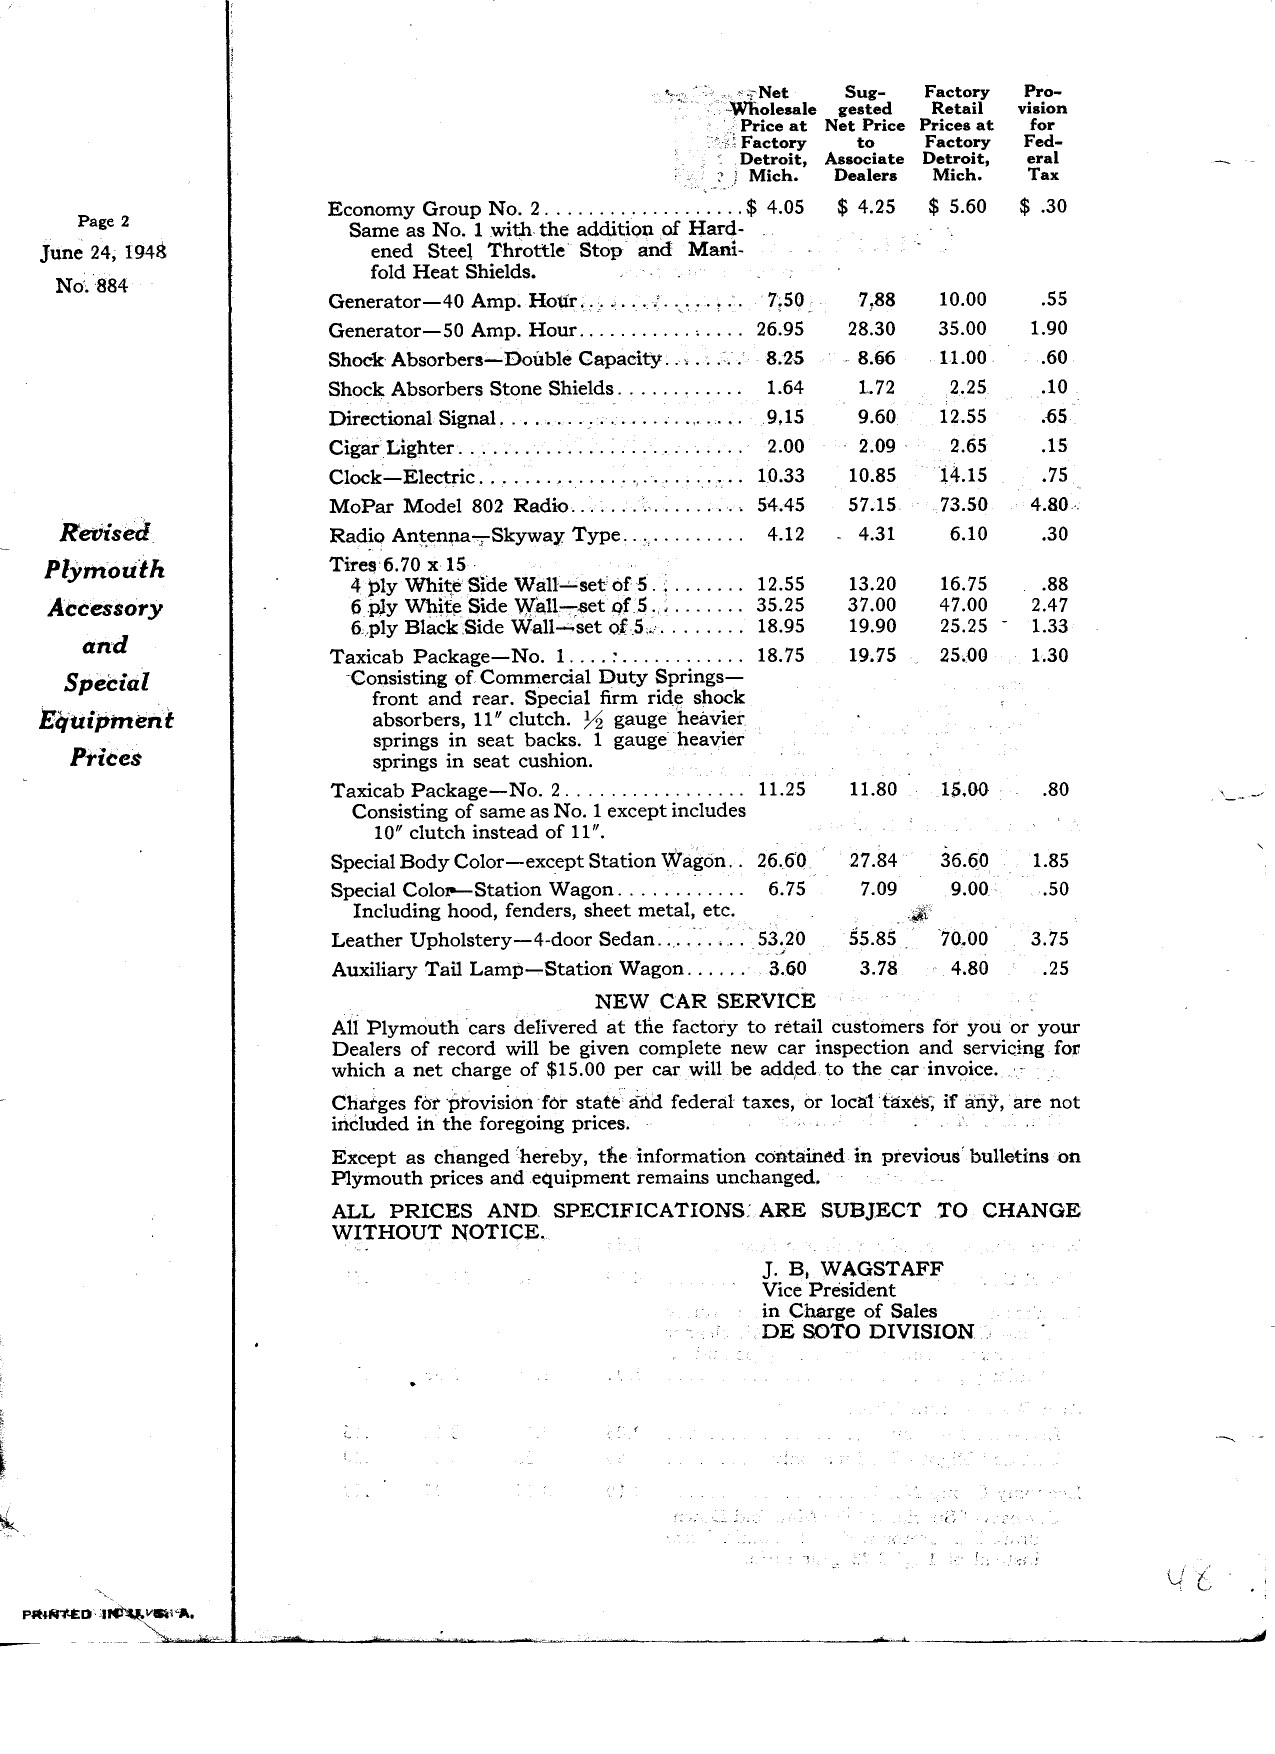 1948_Plymouth_Revised_Accessory_Prices-02